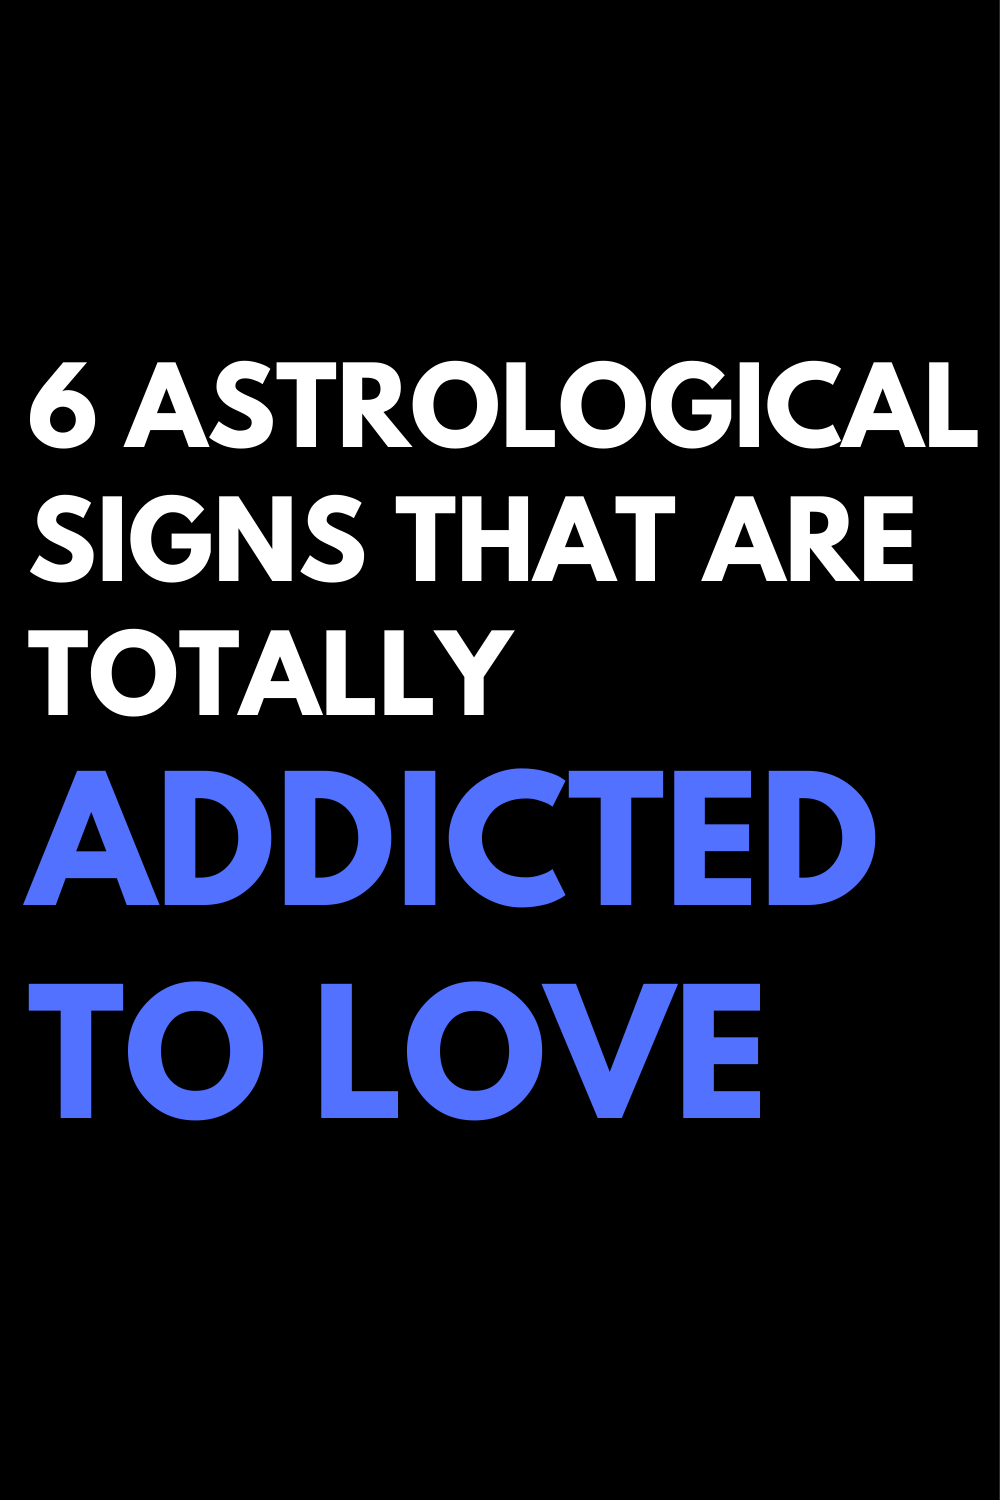 6 astrological signs that are totally addicted to love